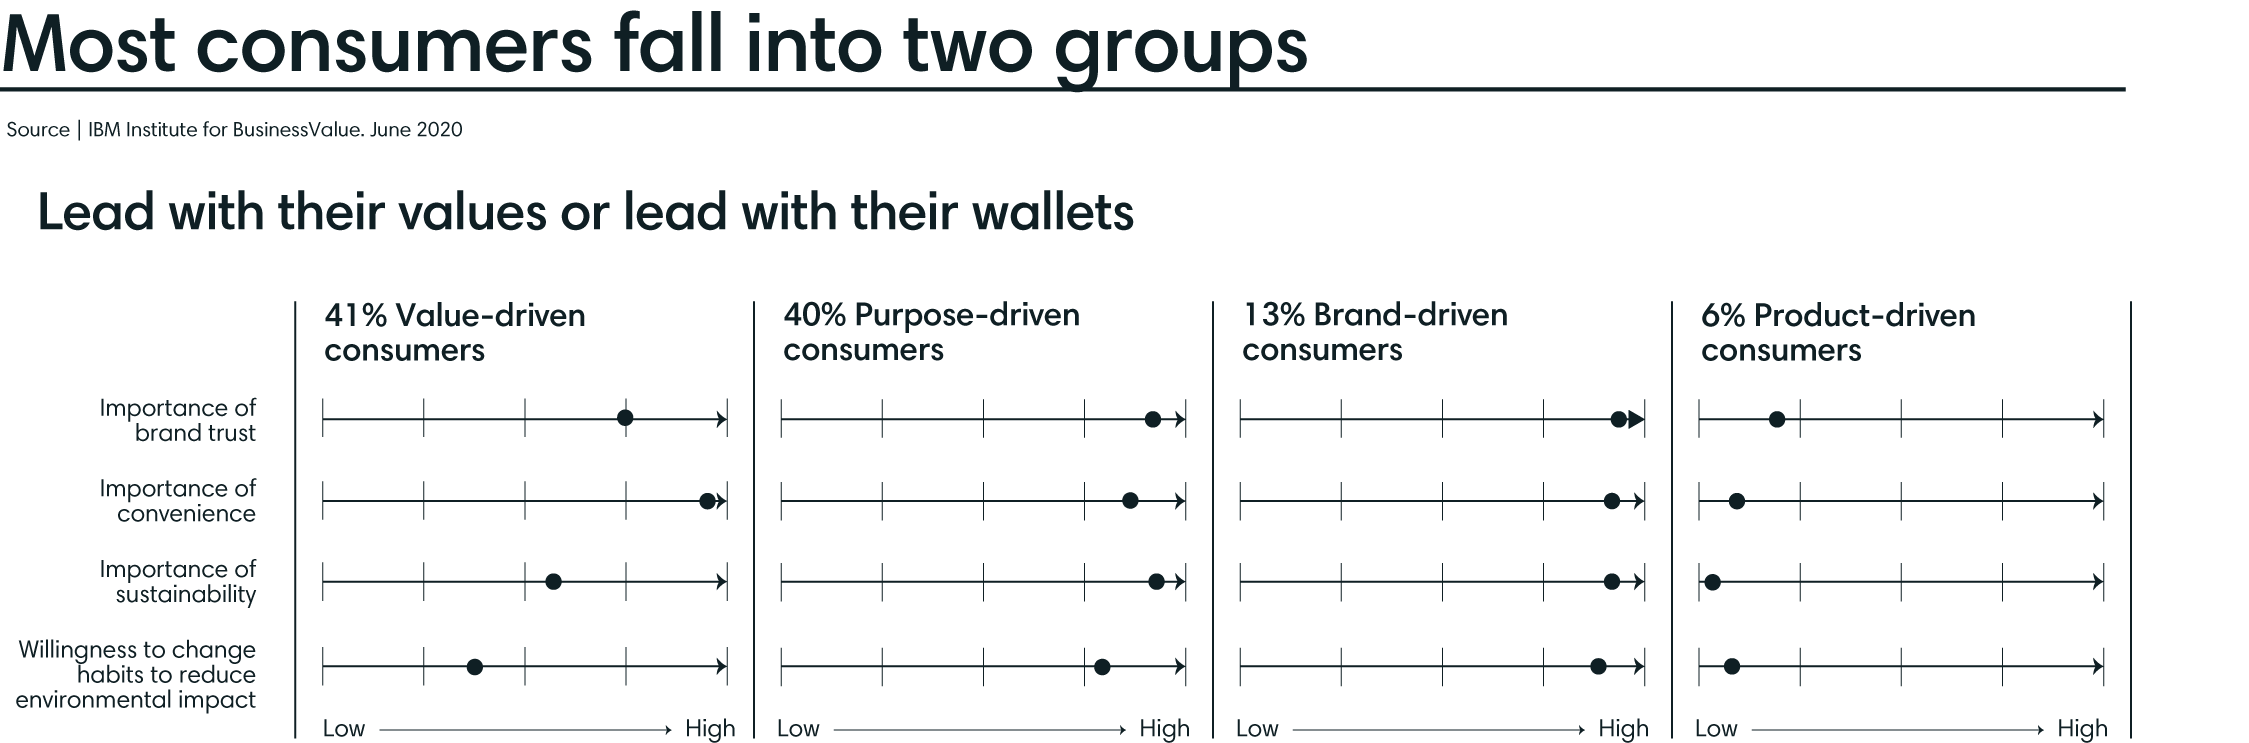 Consumers lead with values or wallets